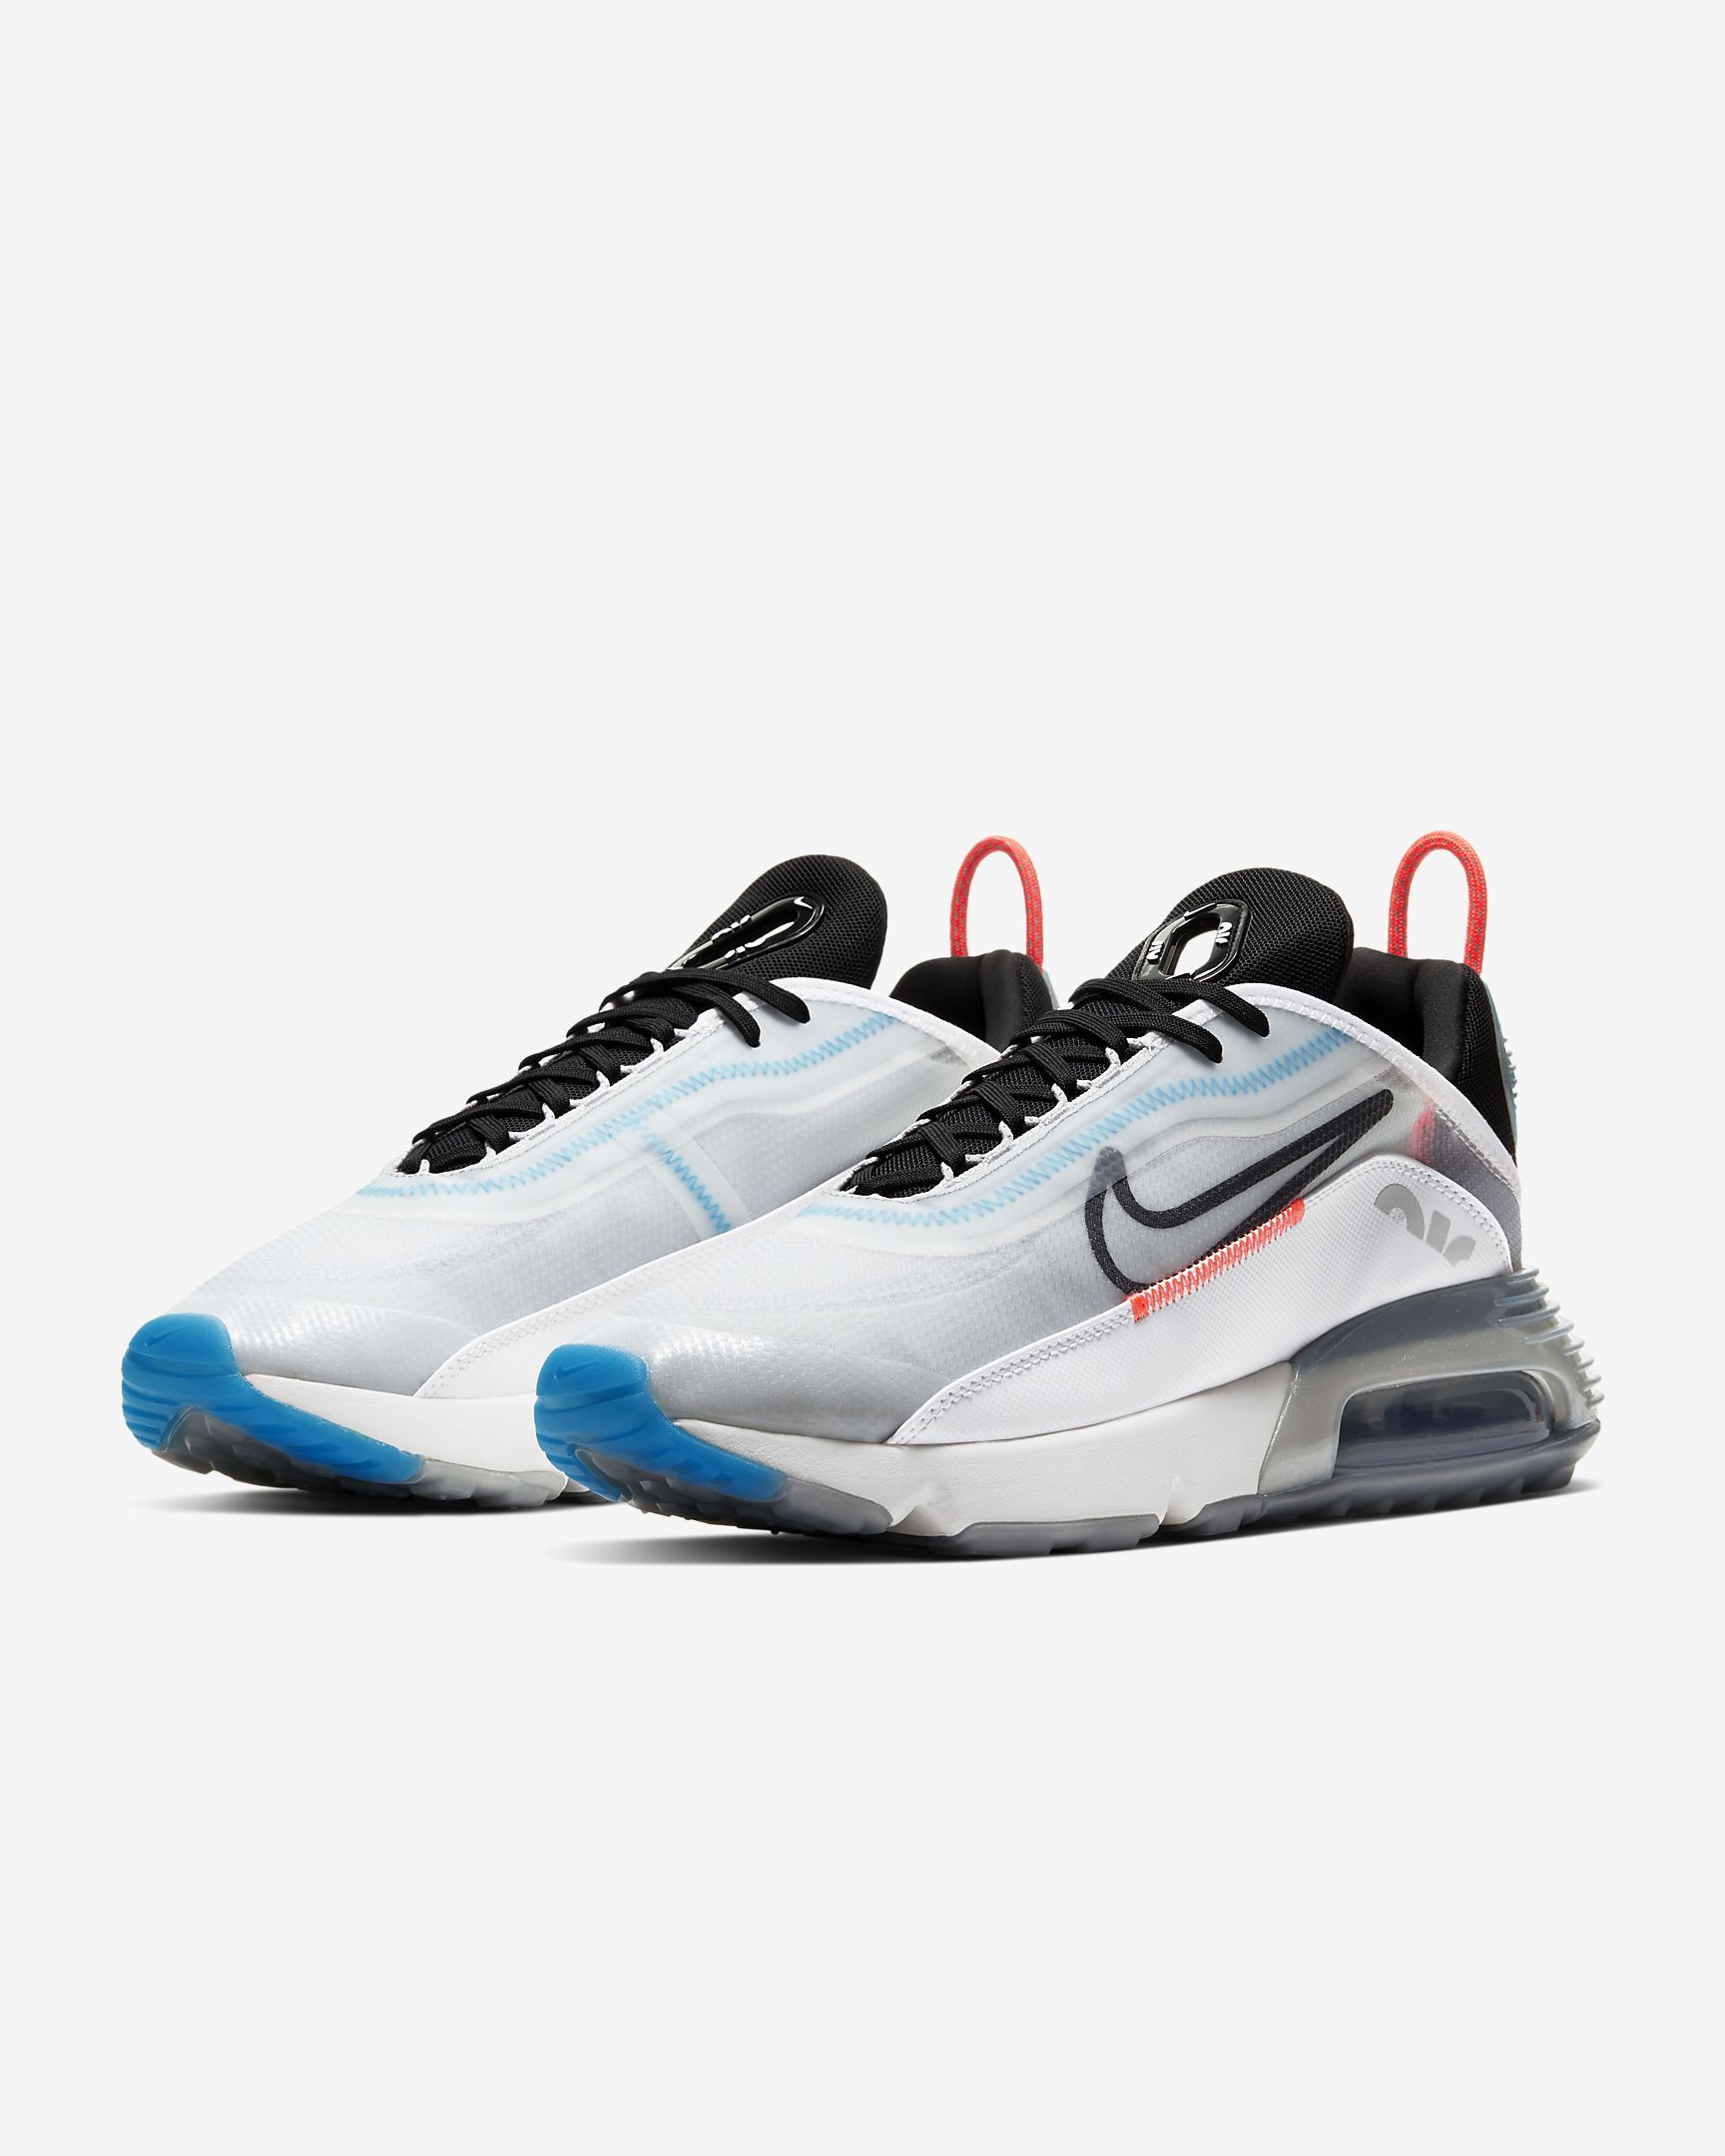 air max day challenge goat